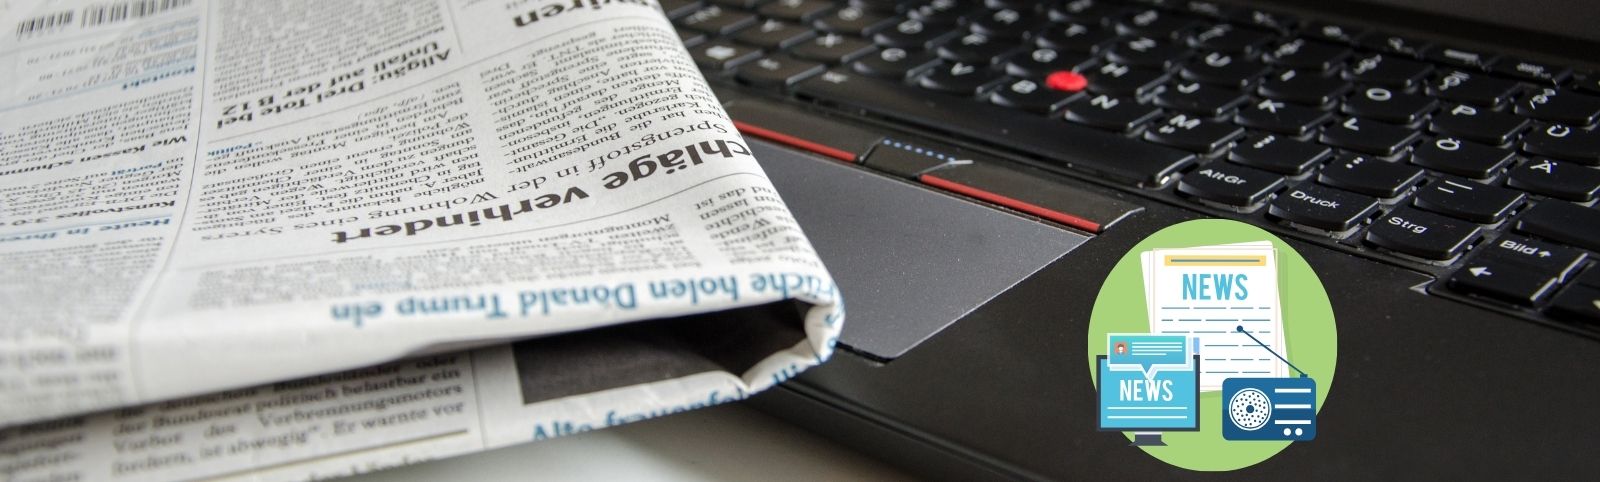 laptop with newspaper resting on it